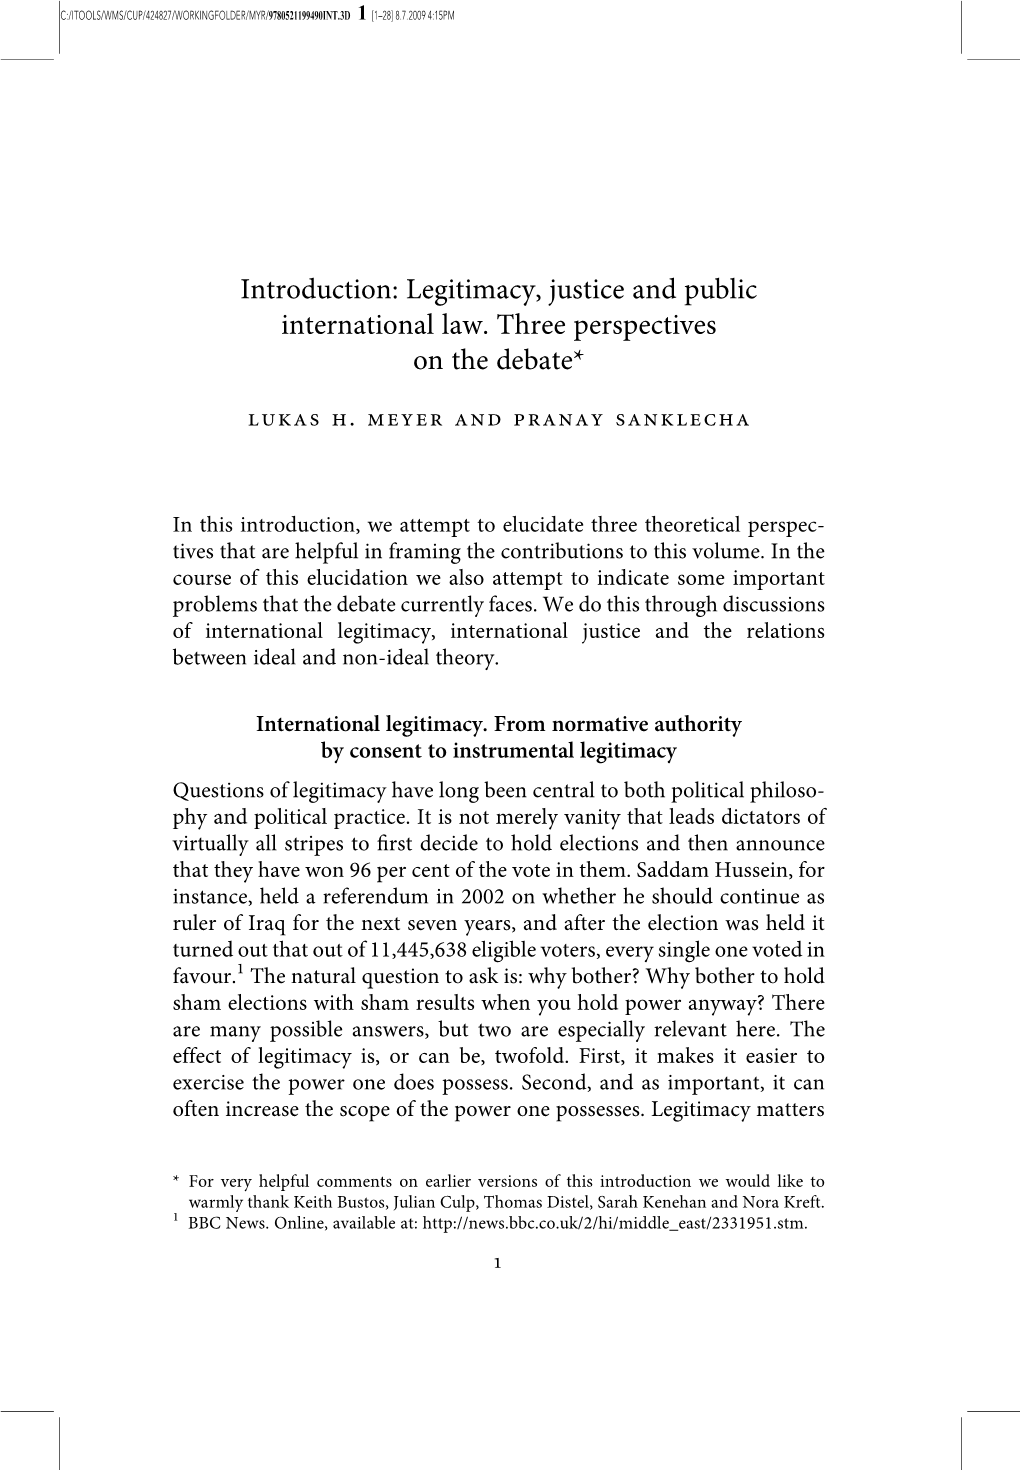 Introduction: Legitimacy, Justice and Public International Law. Three Perspectives on the Debate* Lukas H